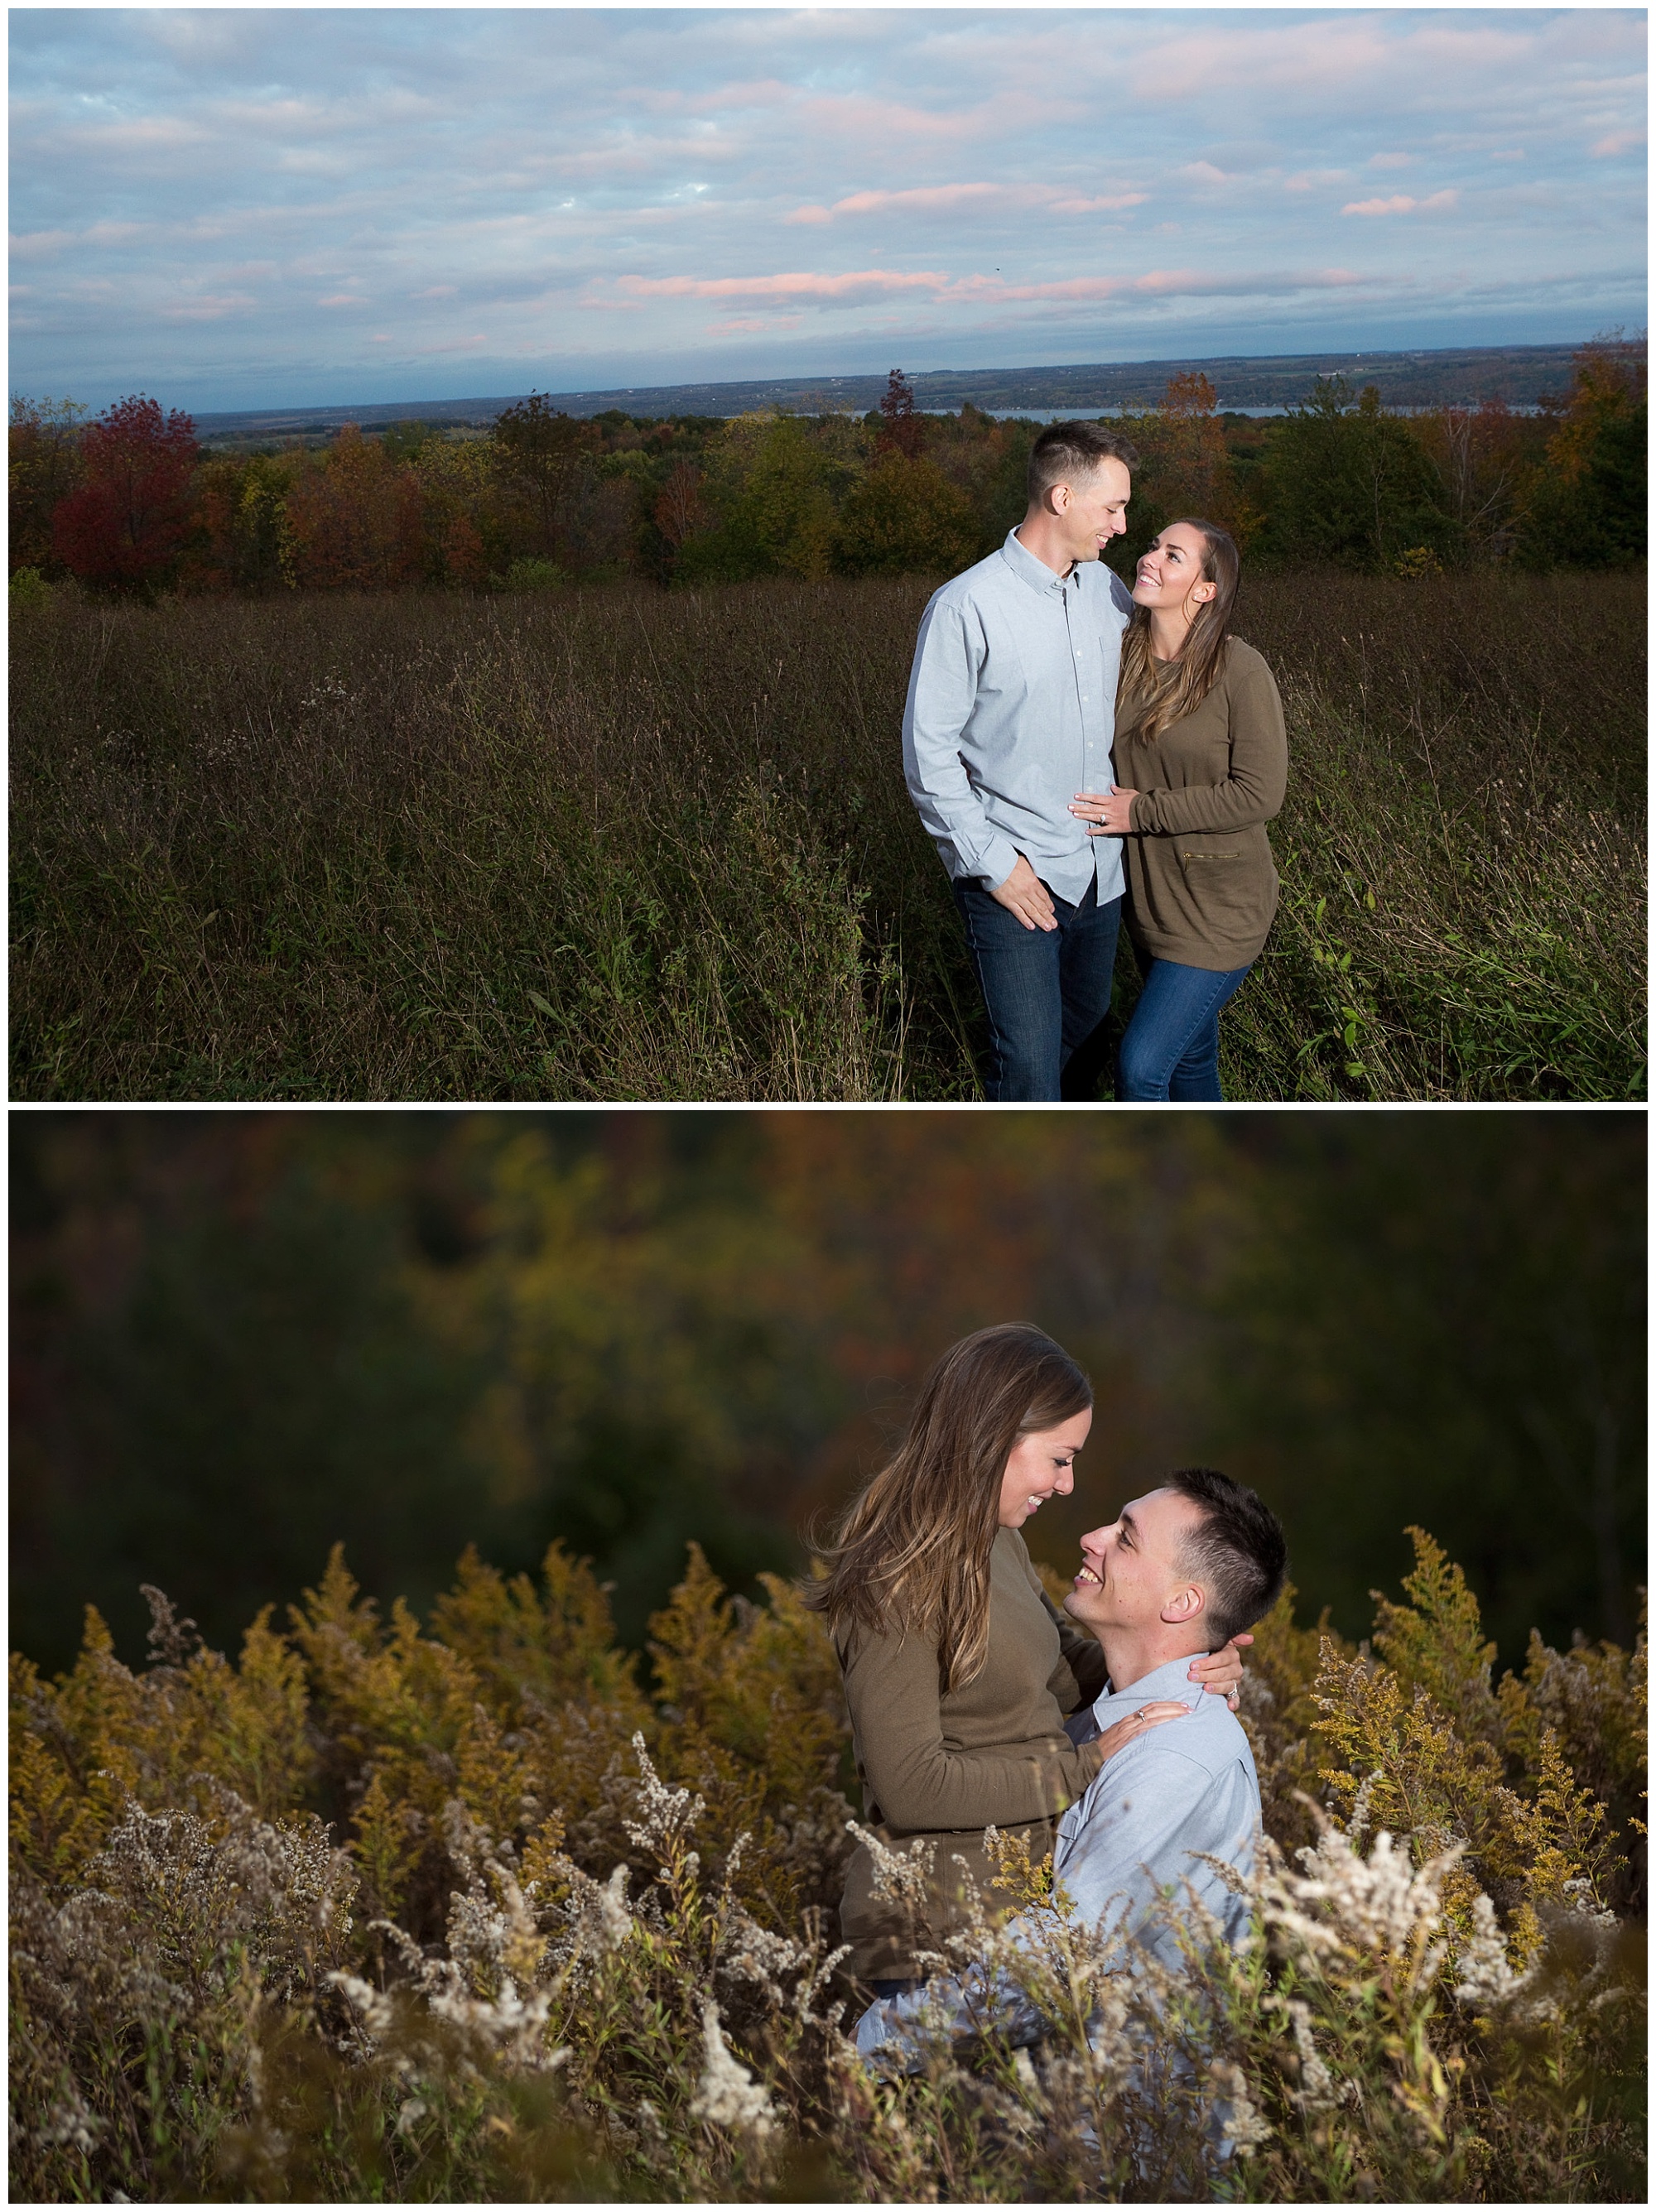 Photo of an engaged couple in a field overlooking Canandaigua lake.